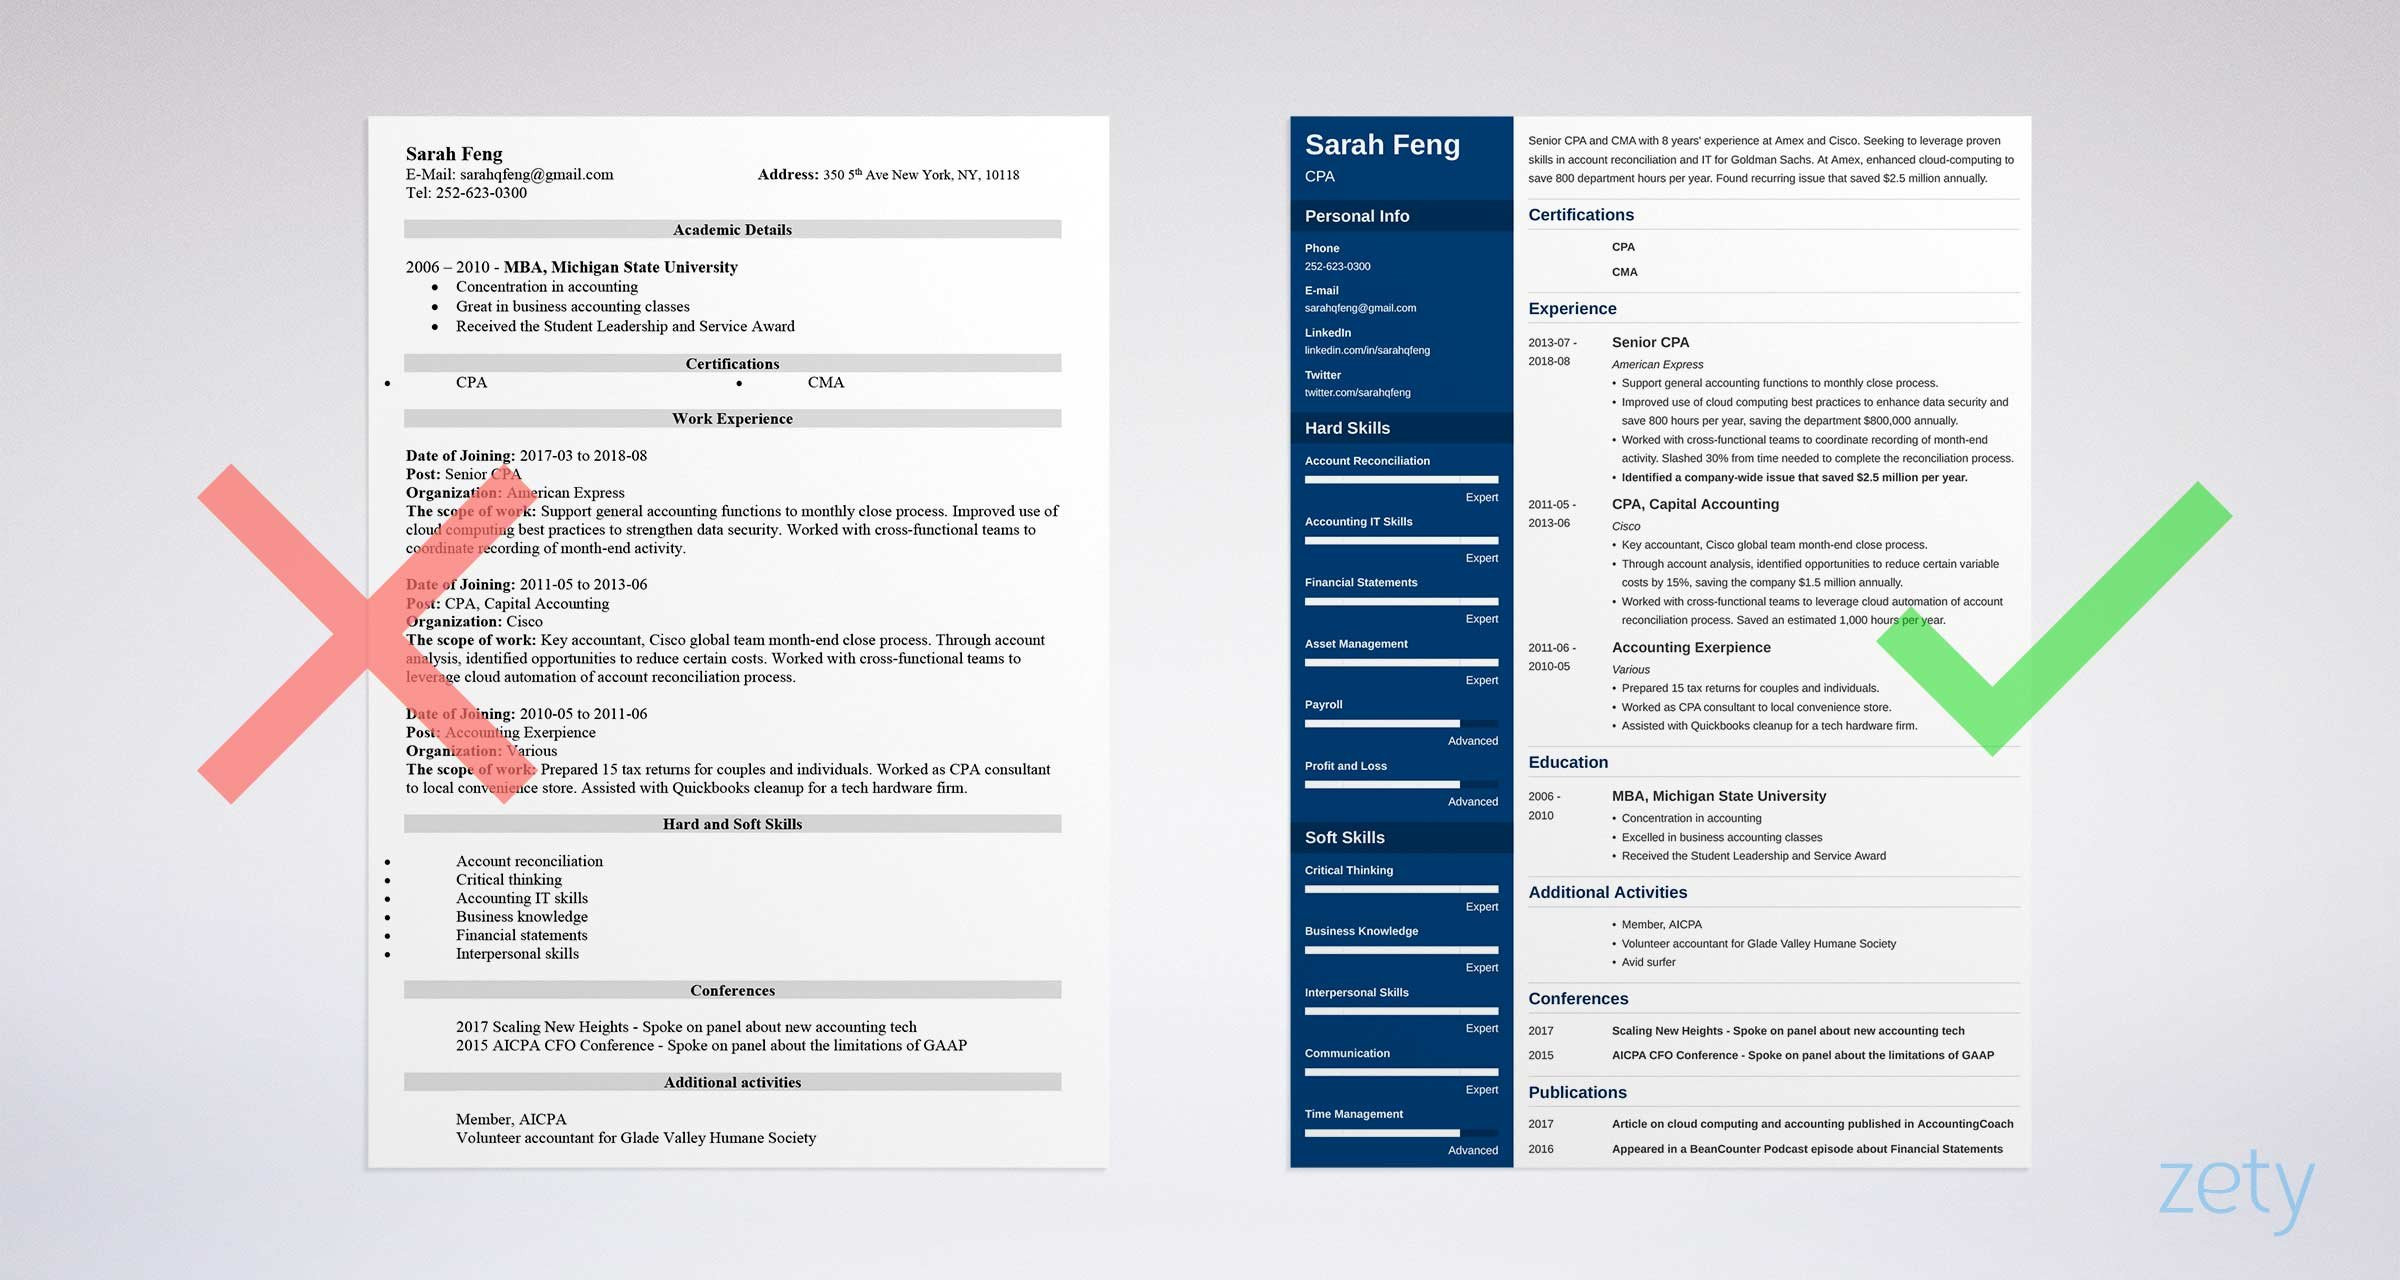 Deloitte National Leadership Conference Resume Sample Accounting Resume: Examples for An Accountant [lancarrezekiqtemplate]